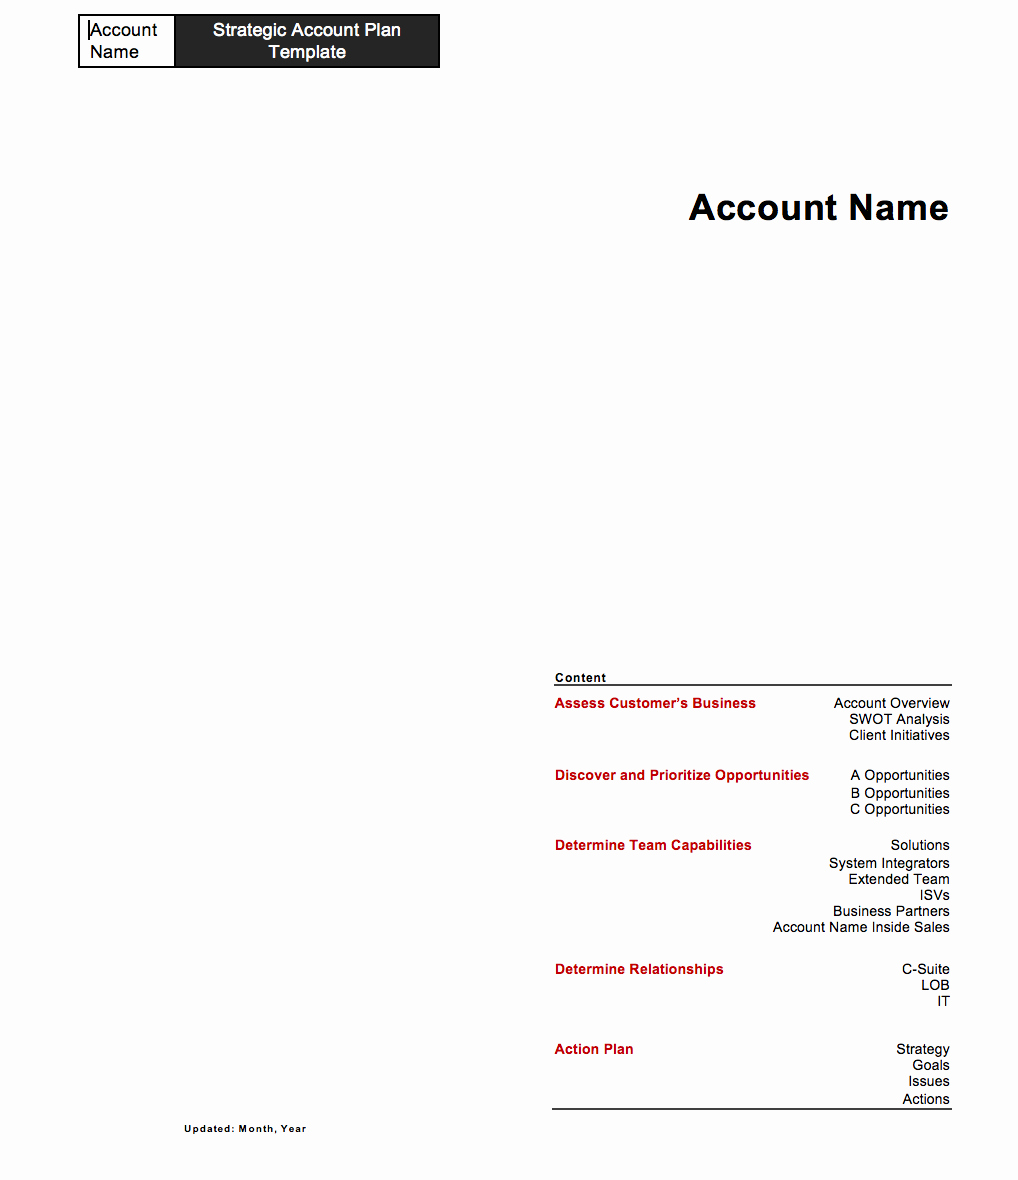 Strategic Account Plan Template Awesome Strategic Account Plan Template for B2b Sales Released by